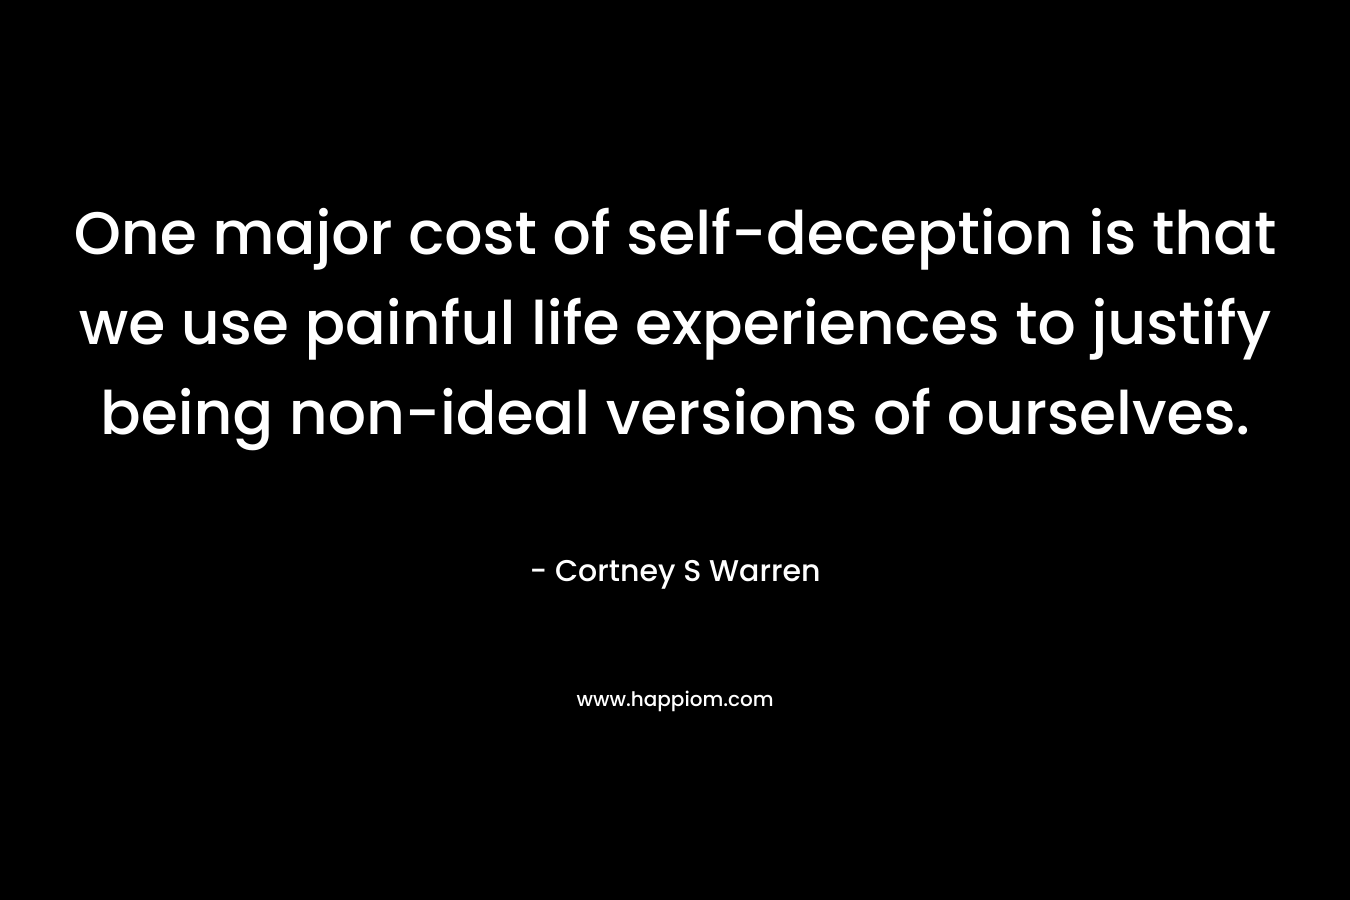 One major cost of self-deception is that we use painful life experiences to justify being non-ideal versions of ourselves.